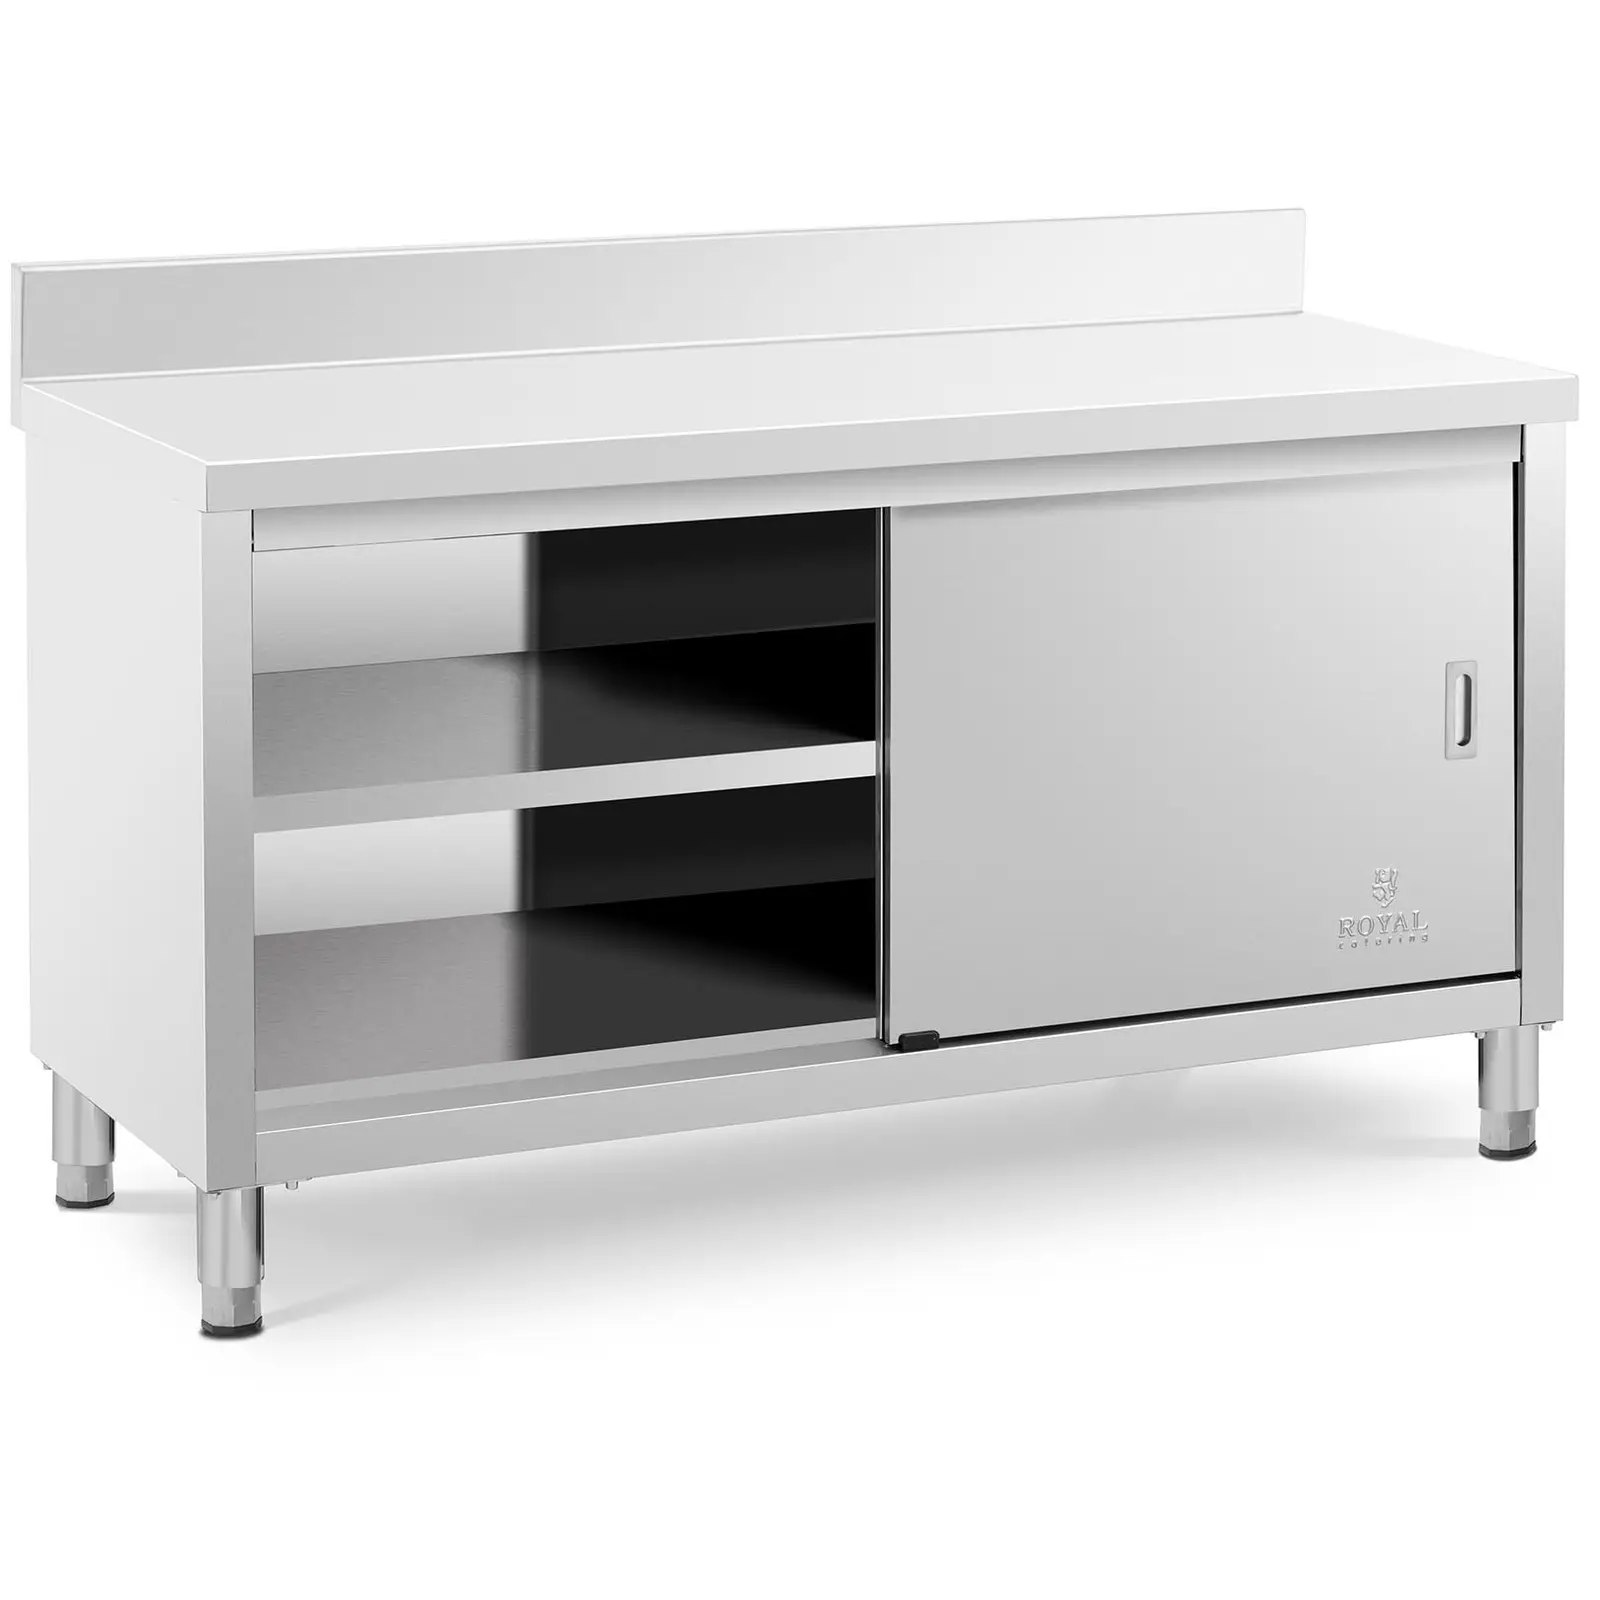 Stainless Steel Work Cabinet - 150 x 60 x 85 cm - upstand - 600 kg load capacity